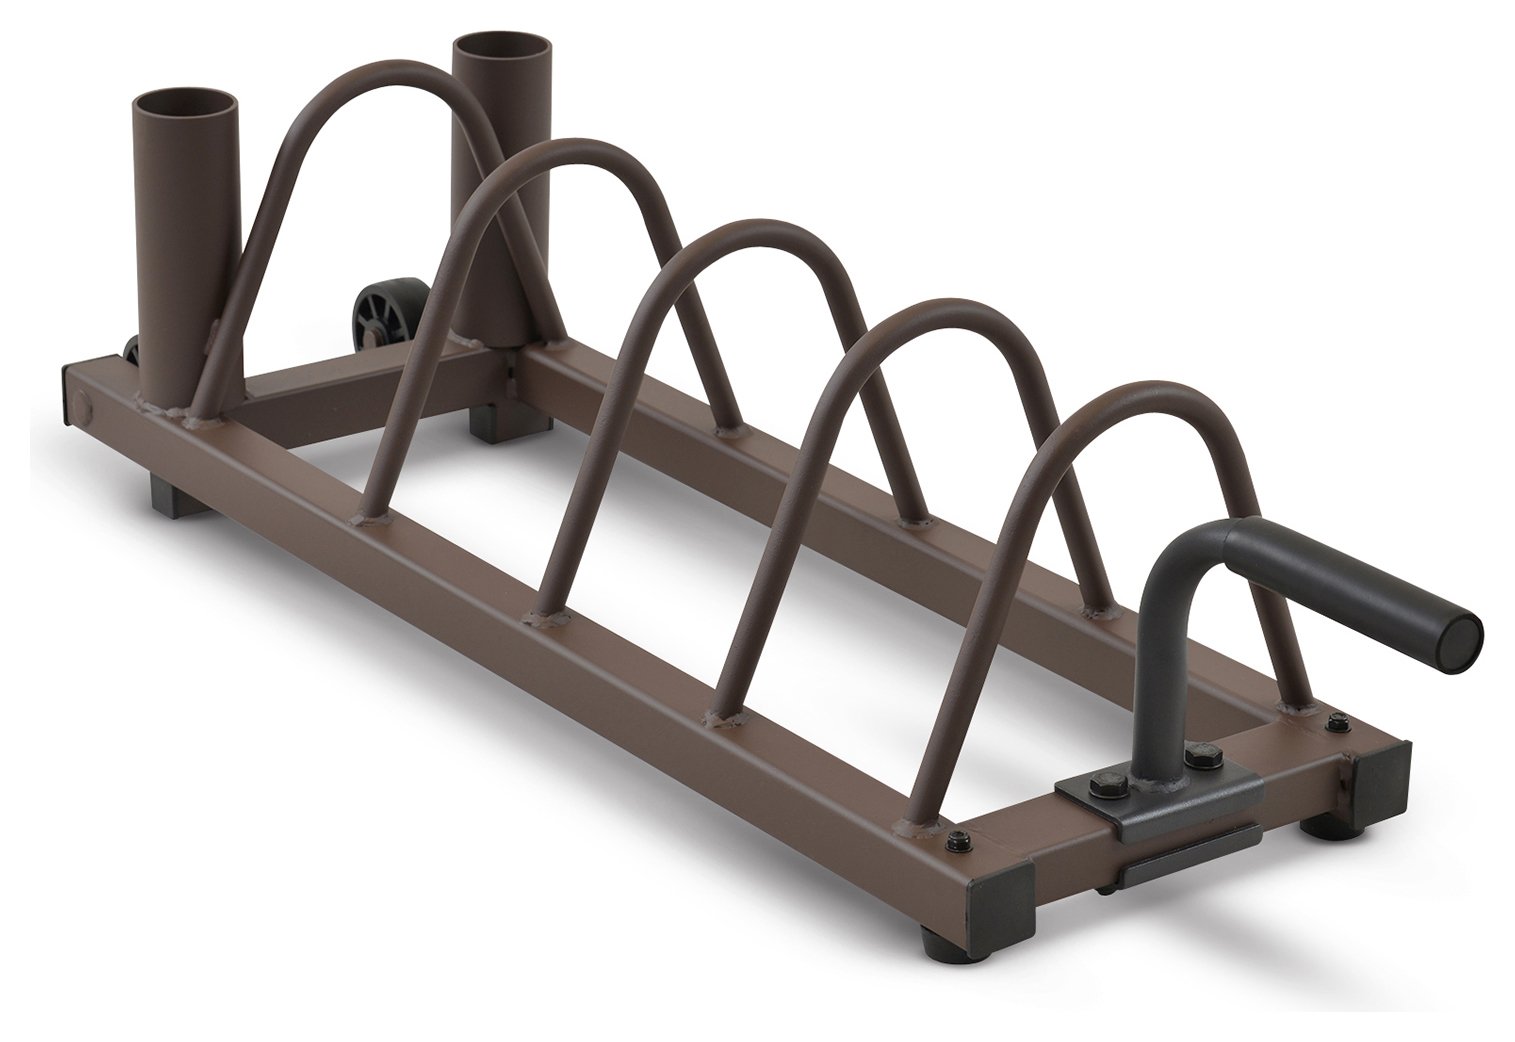 Steelbody by Marcy Horizontal Weight Plate Rack review